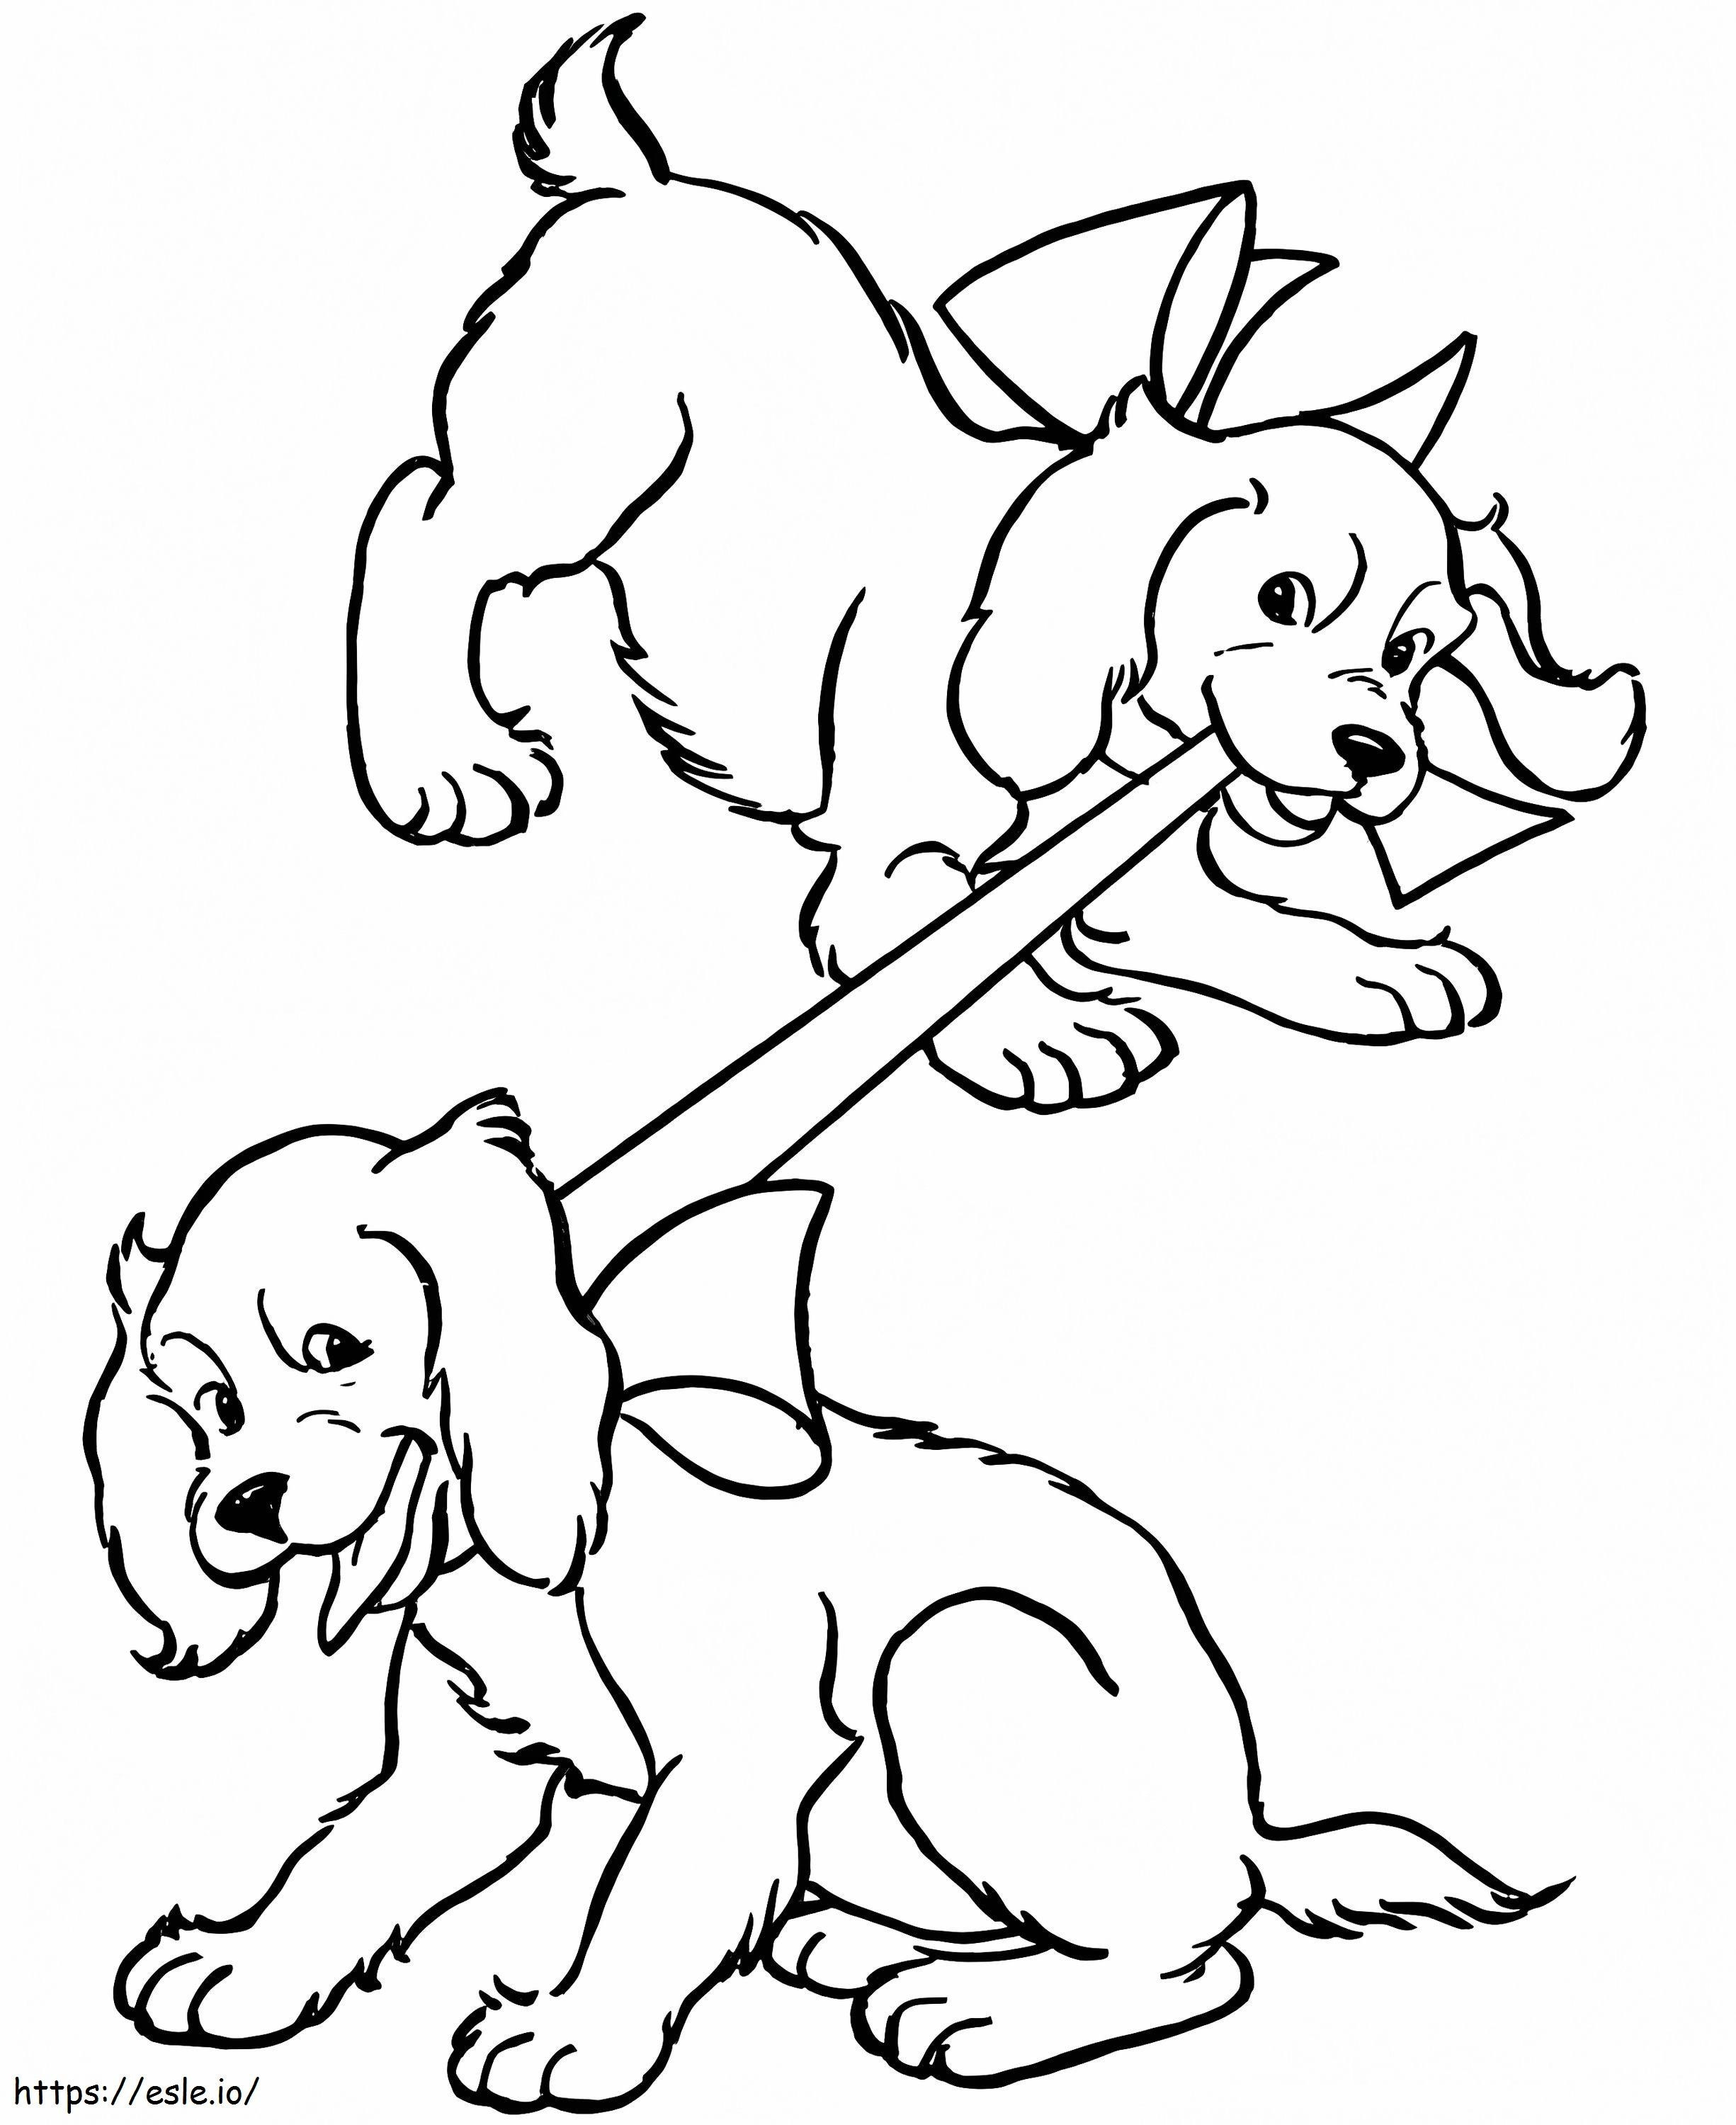 Lovely Puppies coloring page